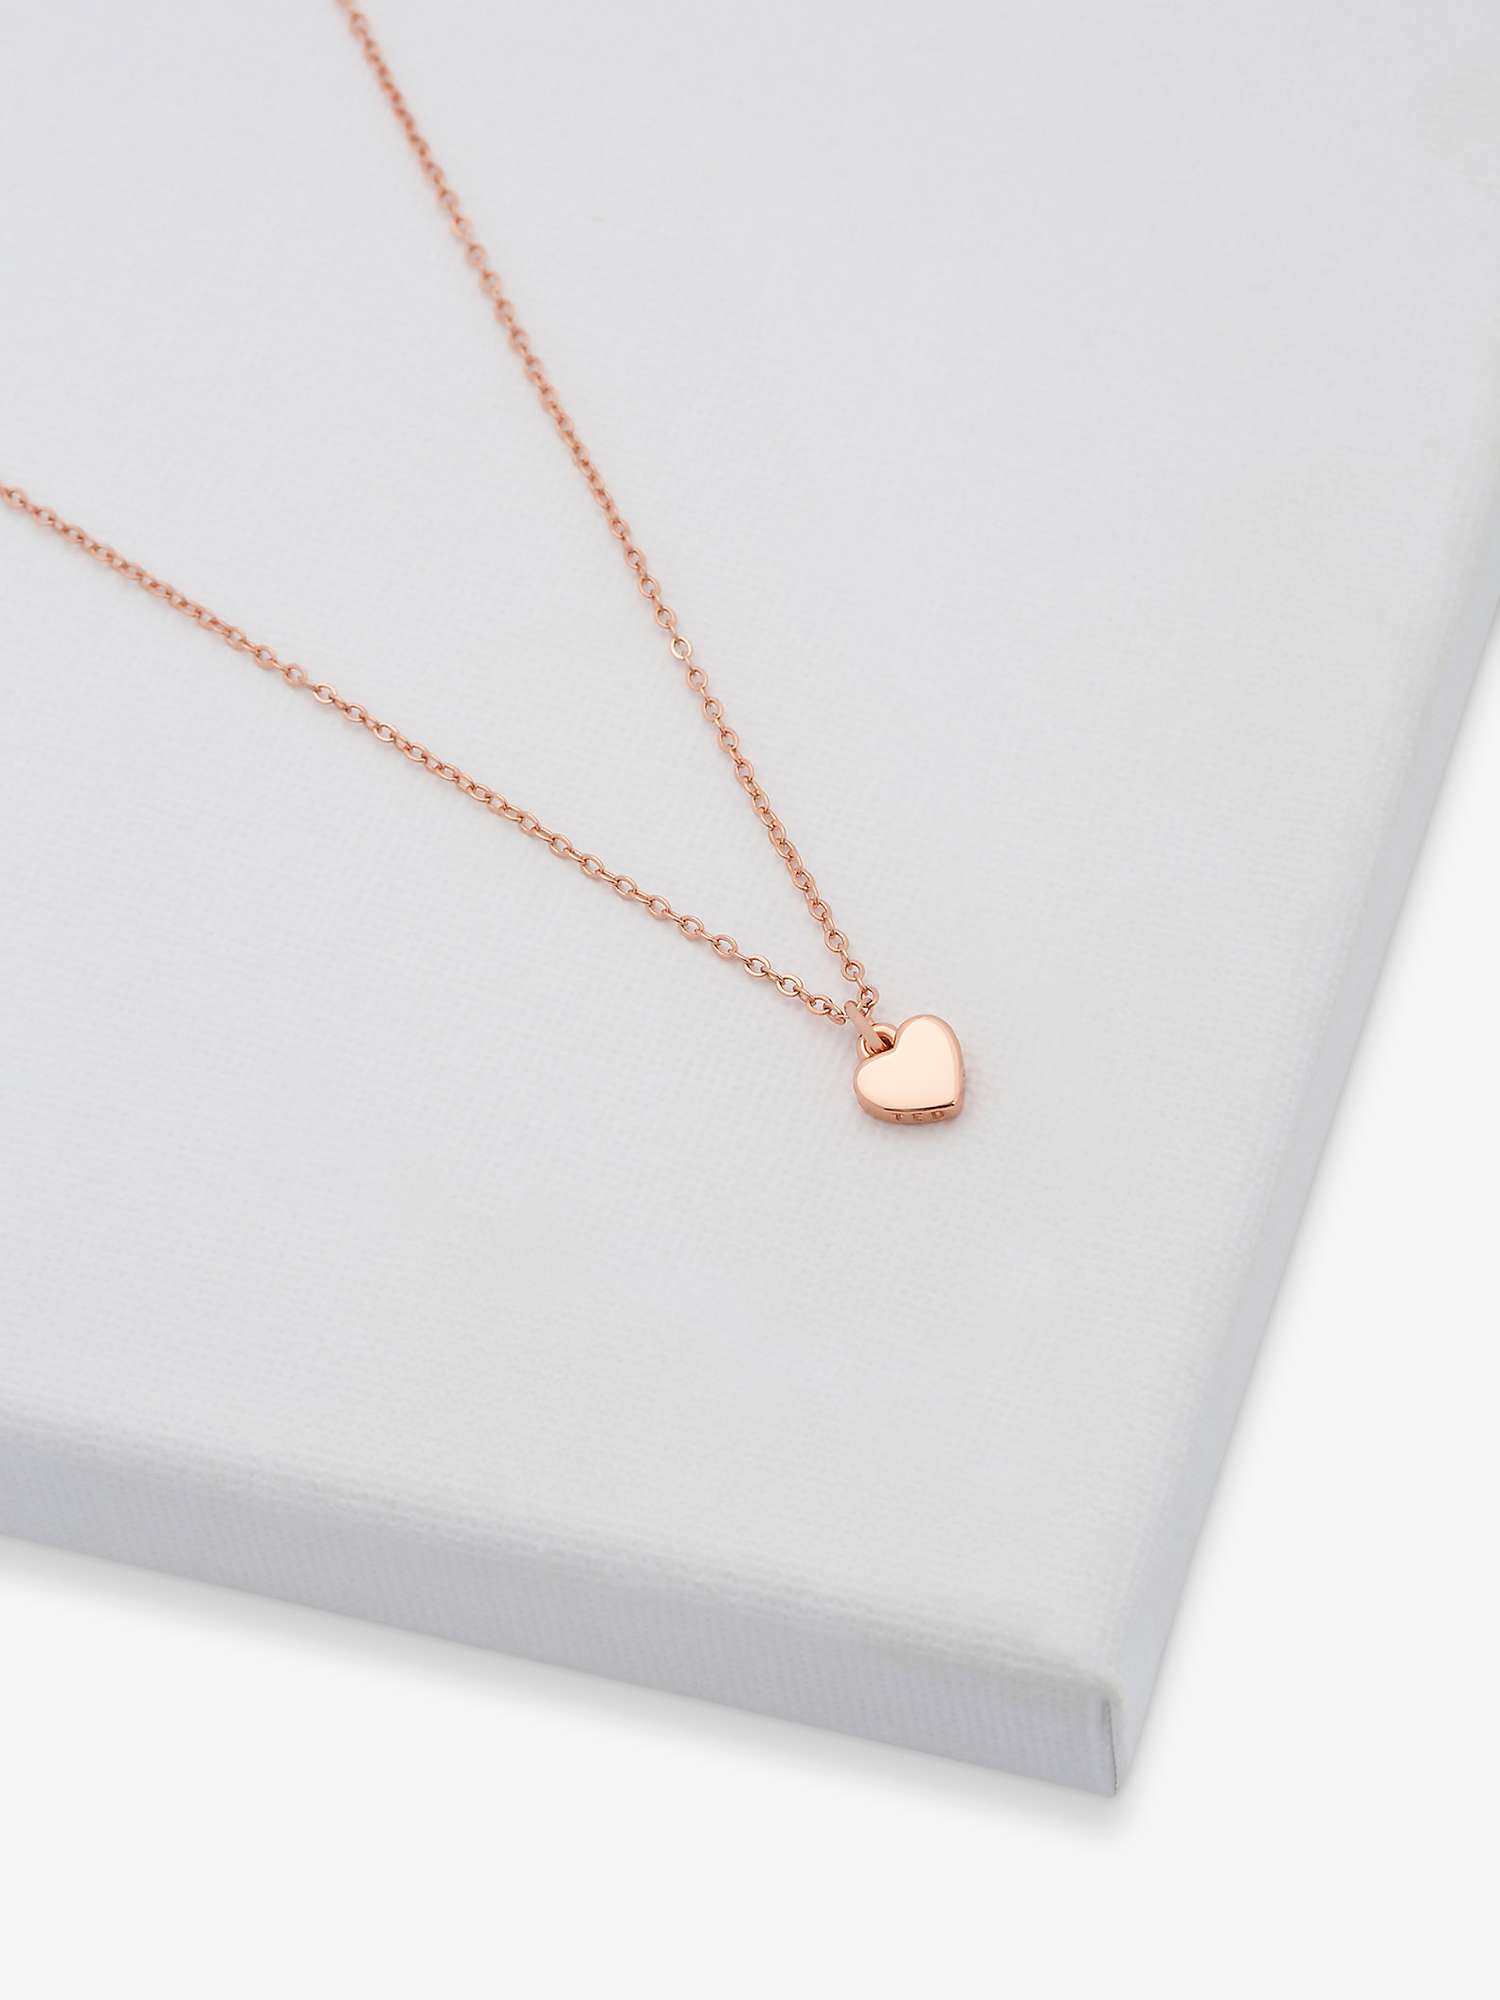 Buy Ted Baker Tiny Heart Pendant Necklace Online at johnlewis.com